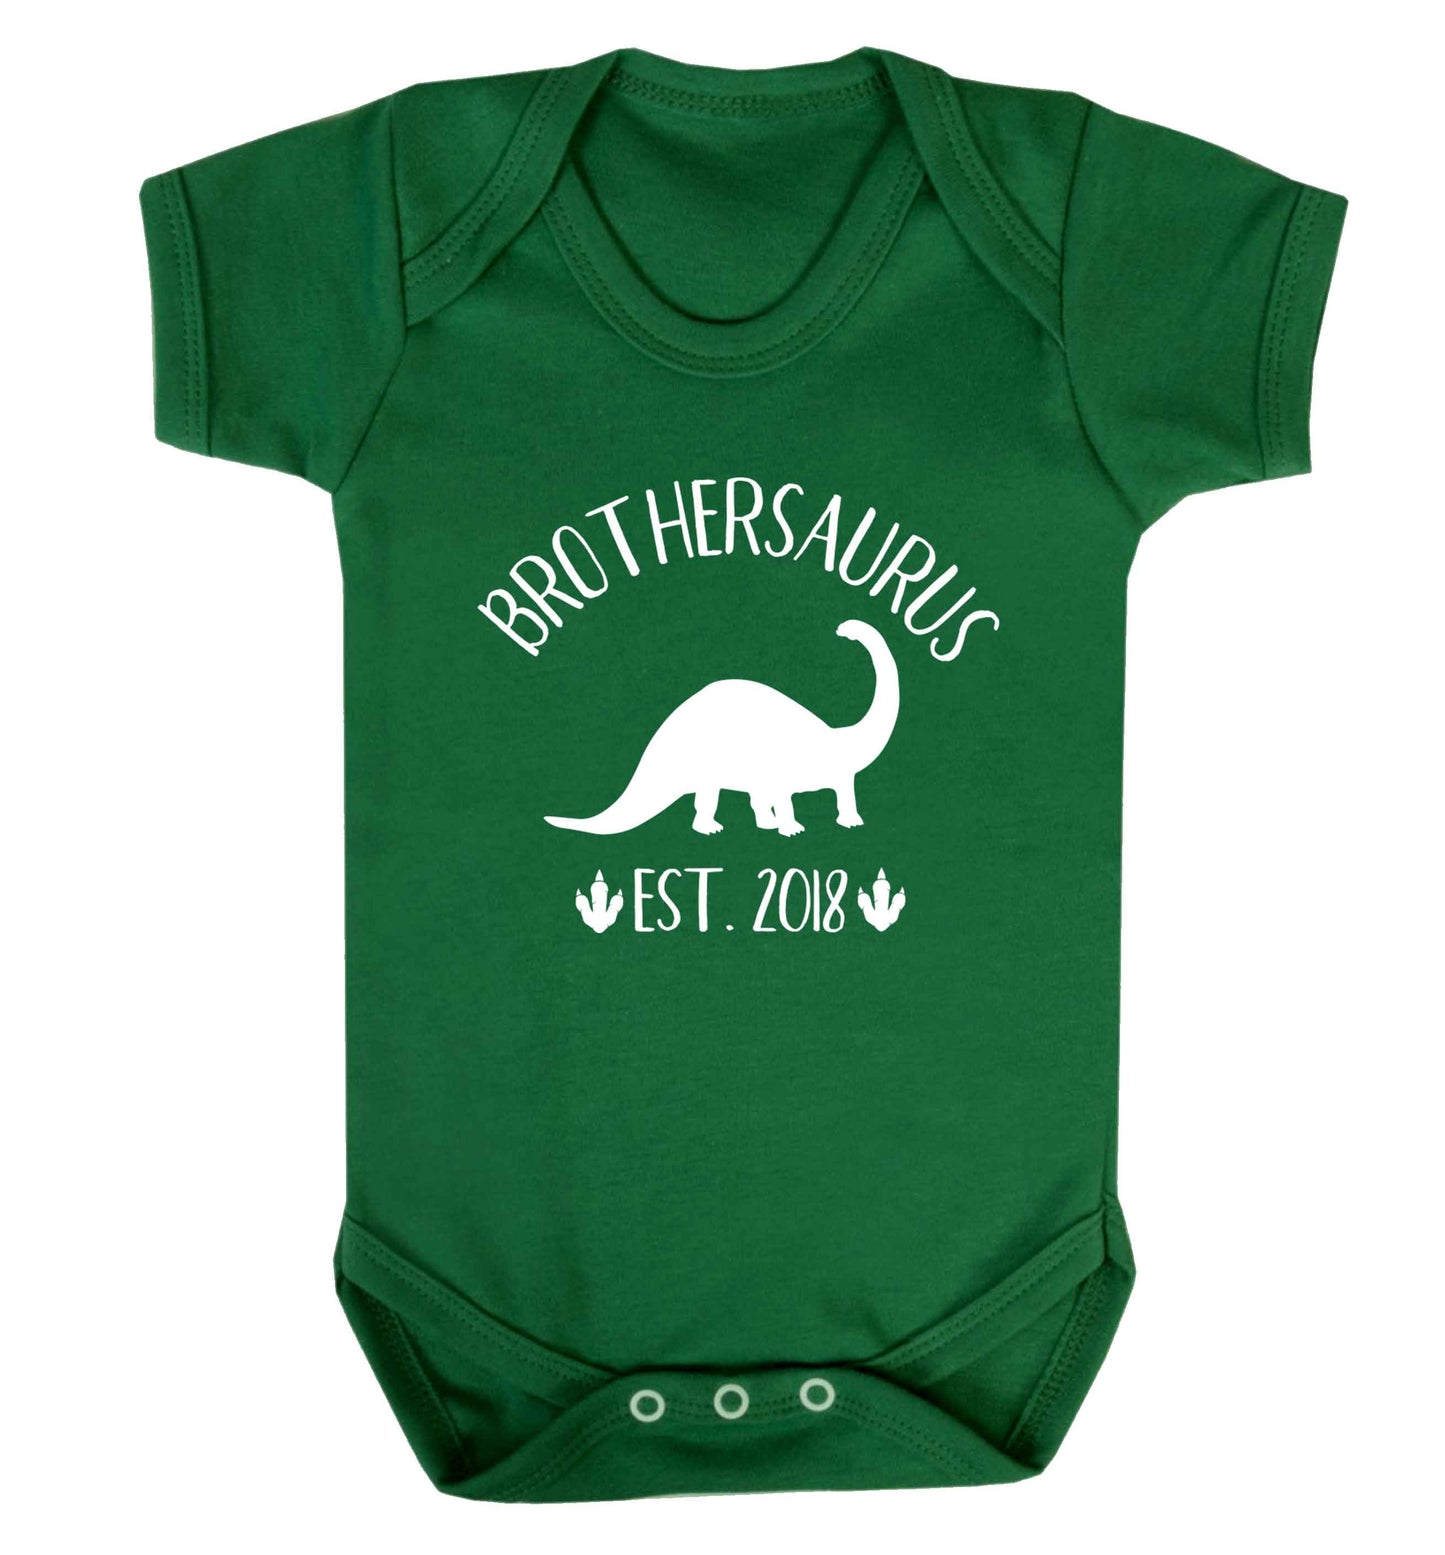 Personalised brothersaurus since (custom date) Baby Vest green 18-24 months